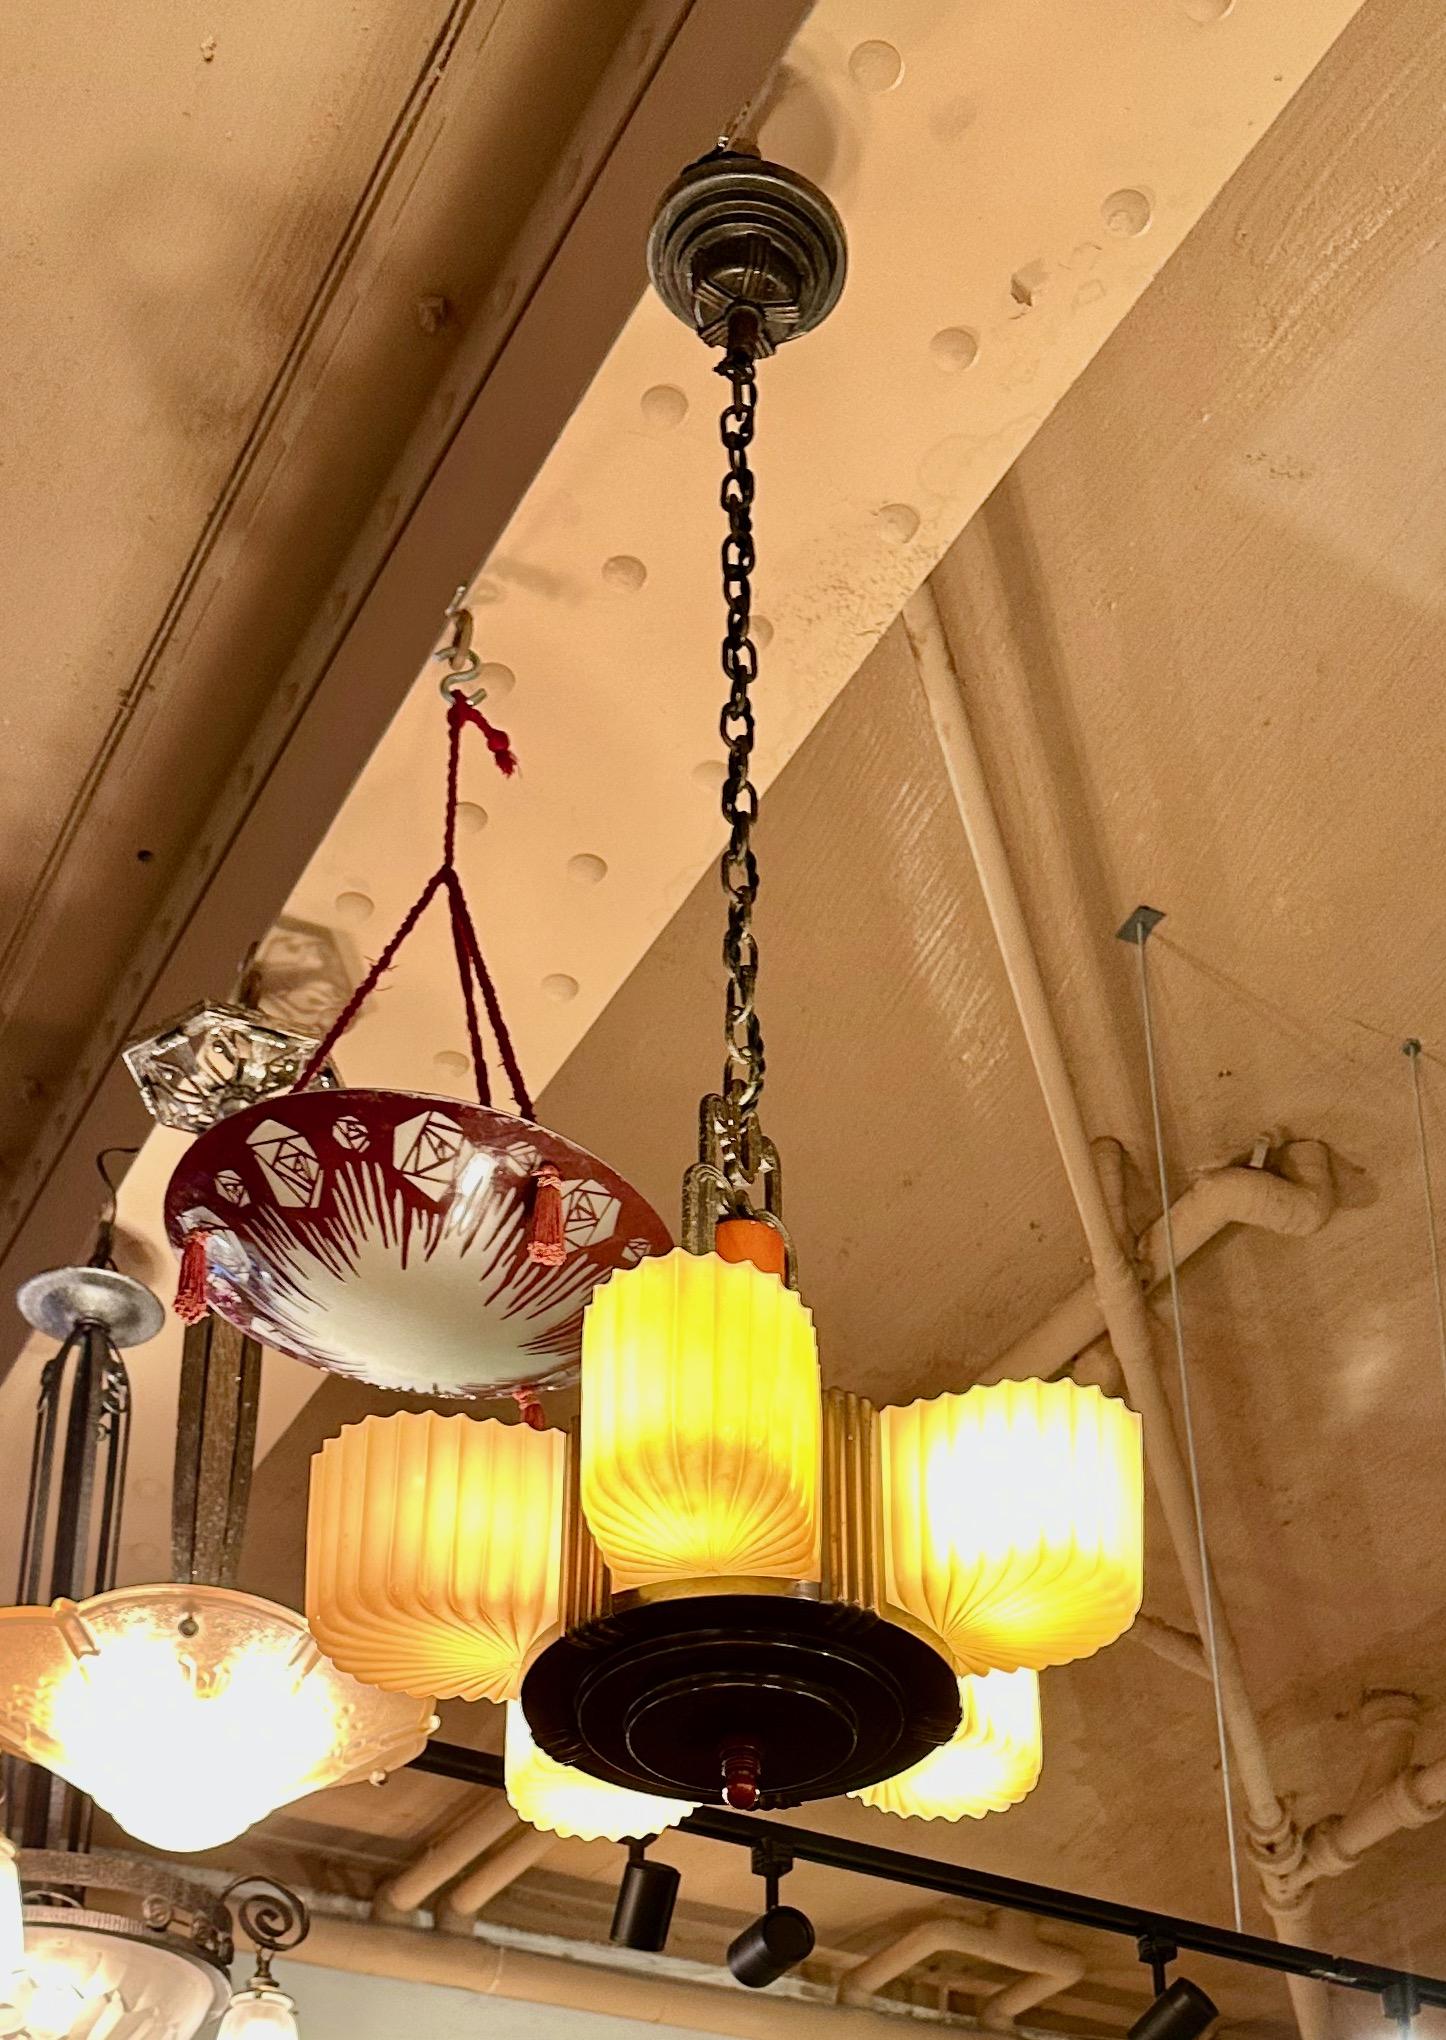 Art Deco Chandelier with Bakelite and Faceted Slip Shade Glass. Made in the USA, one of my favorite American light fixtures. I was lucky enough to buy 3 of them from a house where they were hung for many years. This does not happen ever! This model